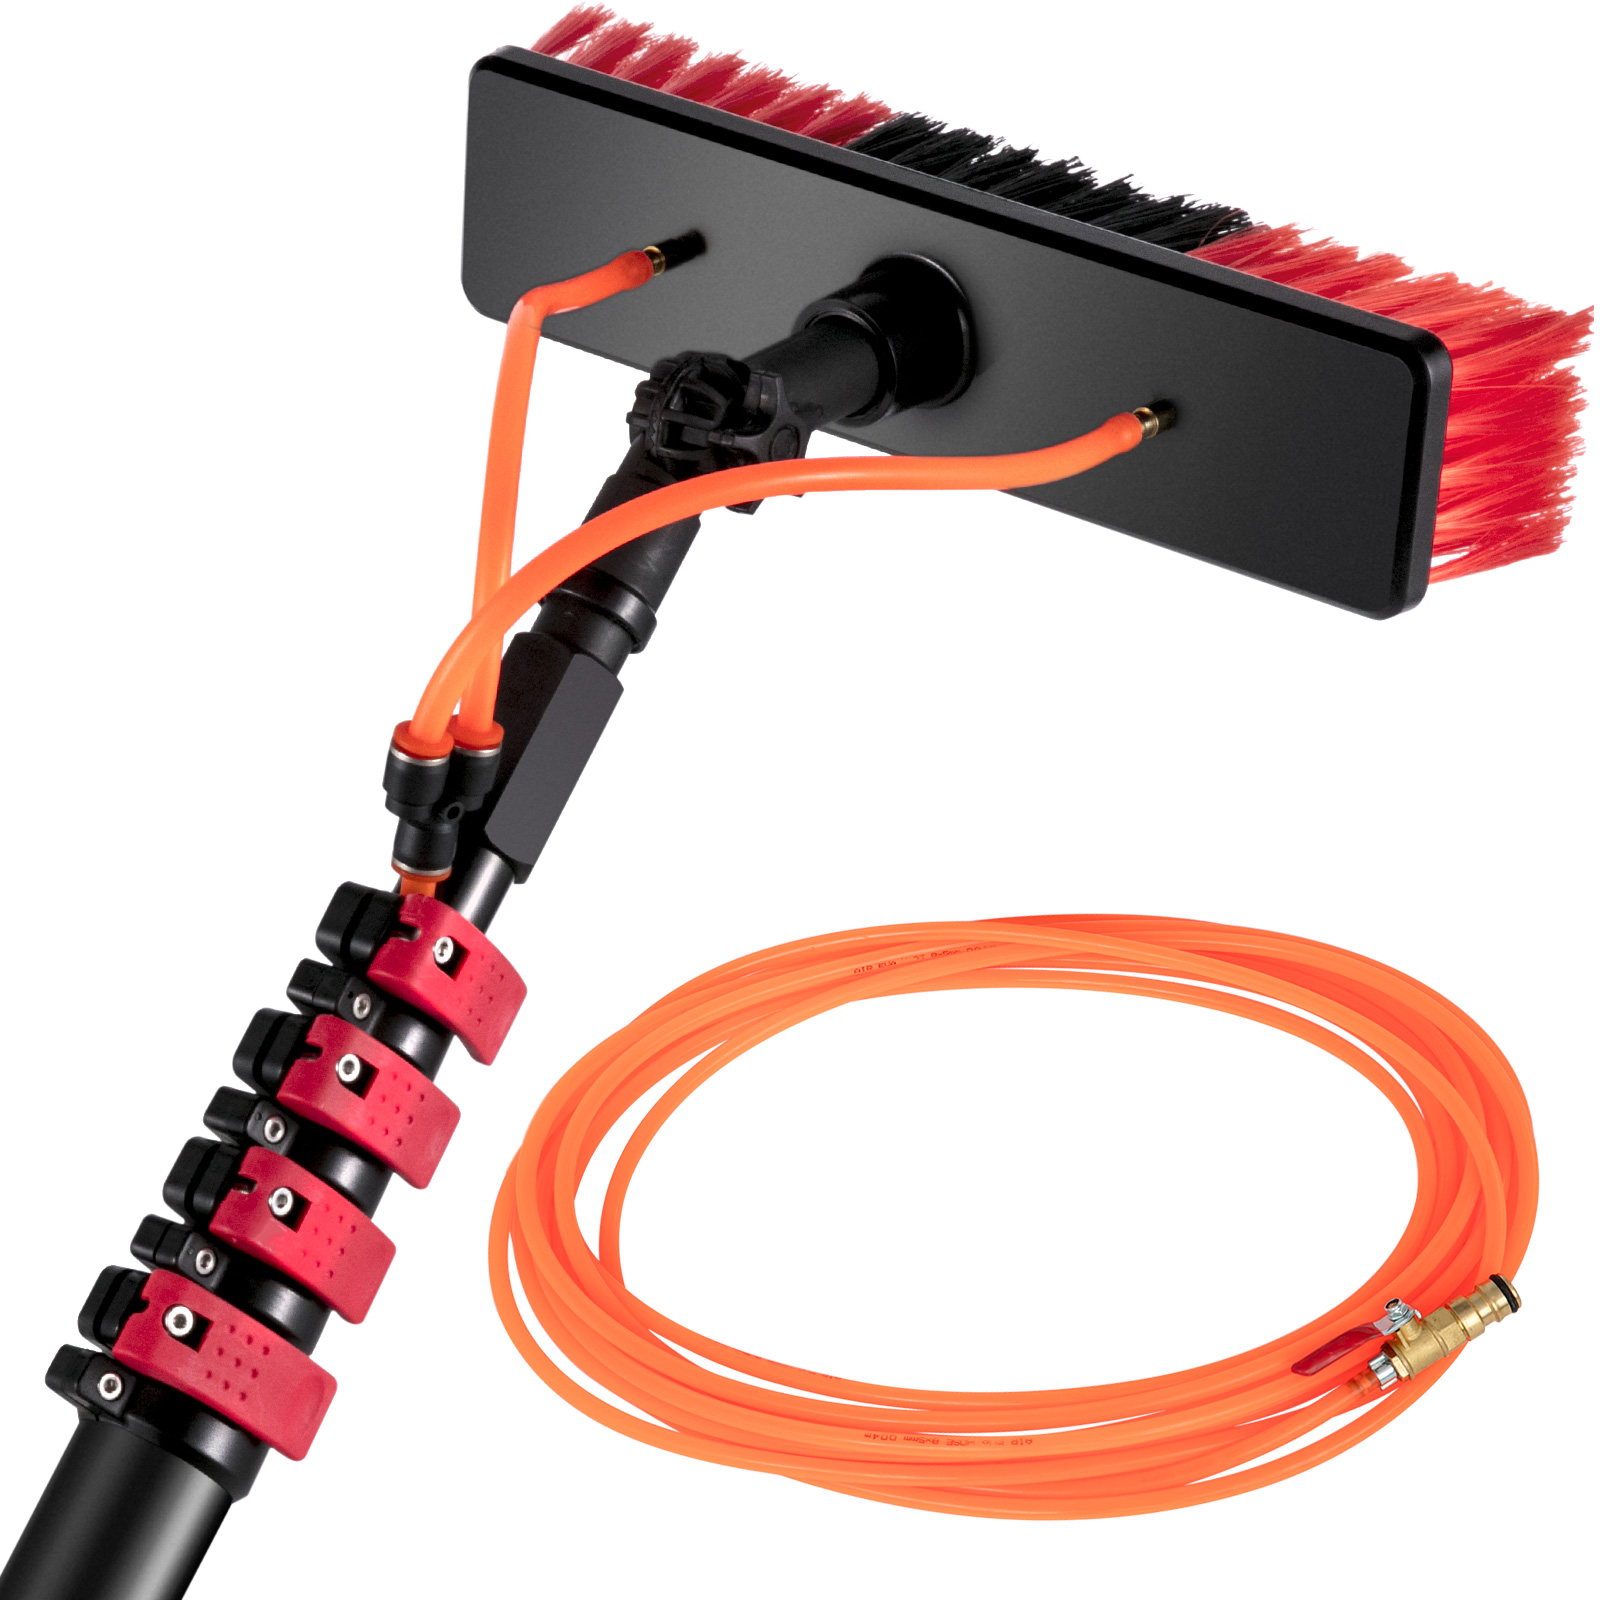 EXTEND-A-REACH 36 Foot Vinyl Siding Brush Set with 7-30 ft Telescopic Pole  & Window Cleaning Squeegee Tool